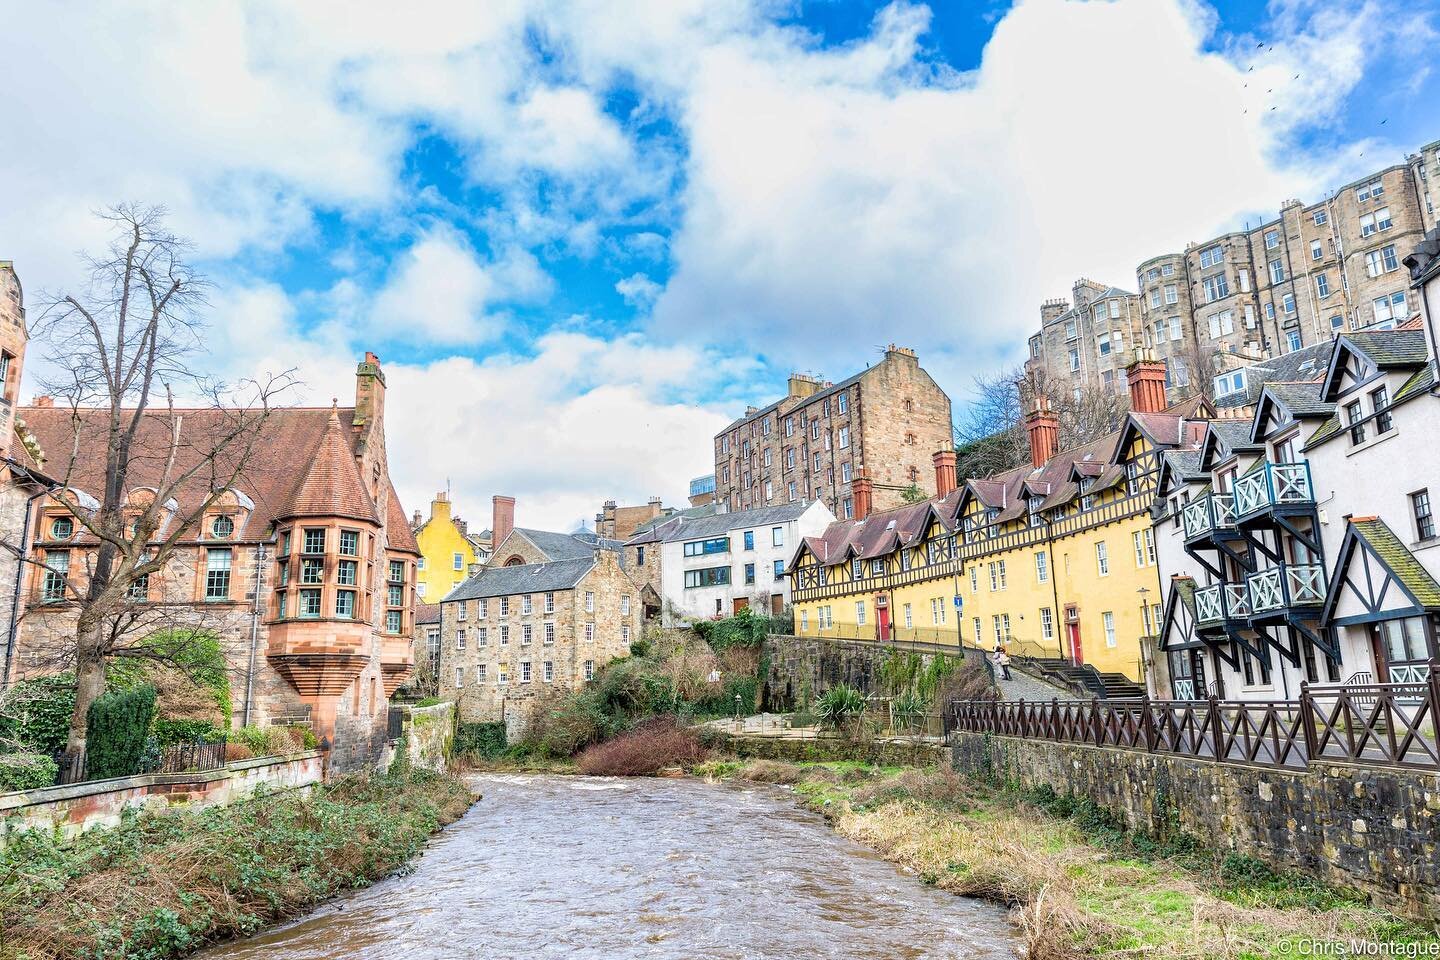 Edinburgh Visit Part 1 - Dean Village
&bull;
Have I mentioned before how I love Edinburgh. It still never fails to amaze me how stunning the place is. 
&bull;
With the many times I visited over the years, I still manage to find somewhere different an